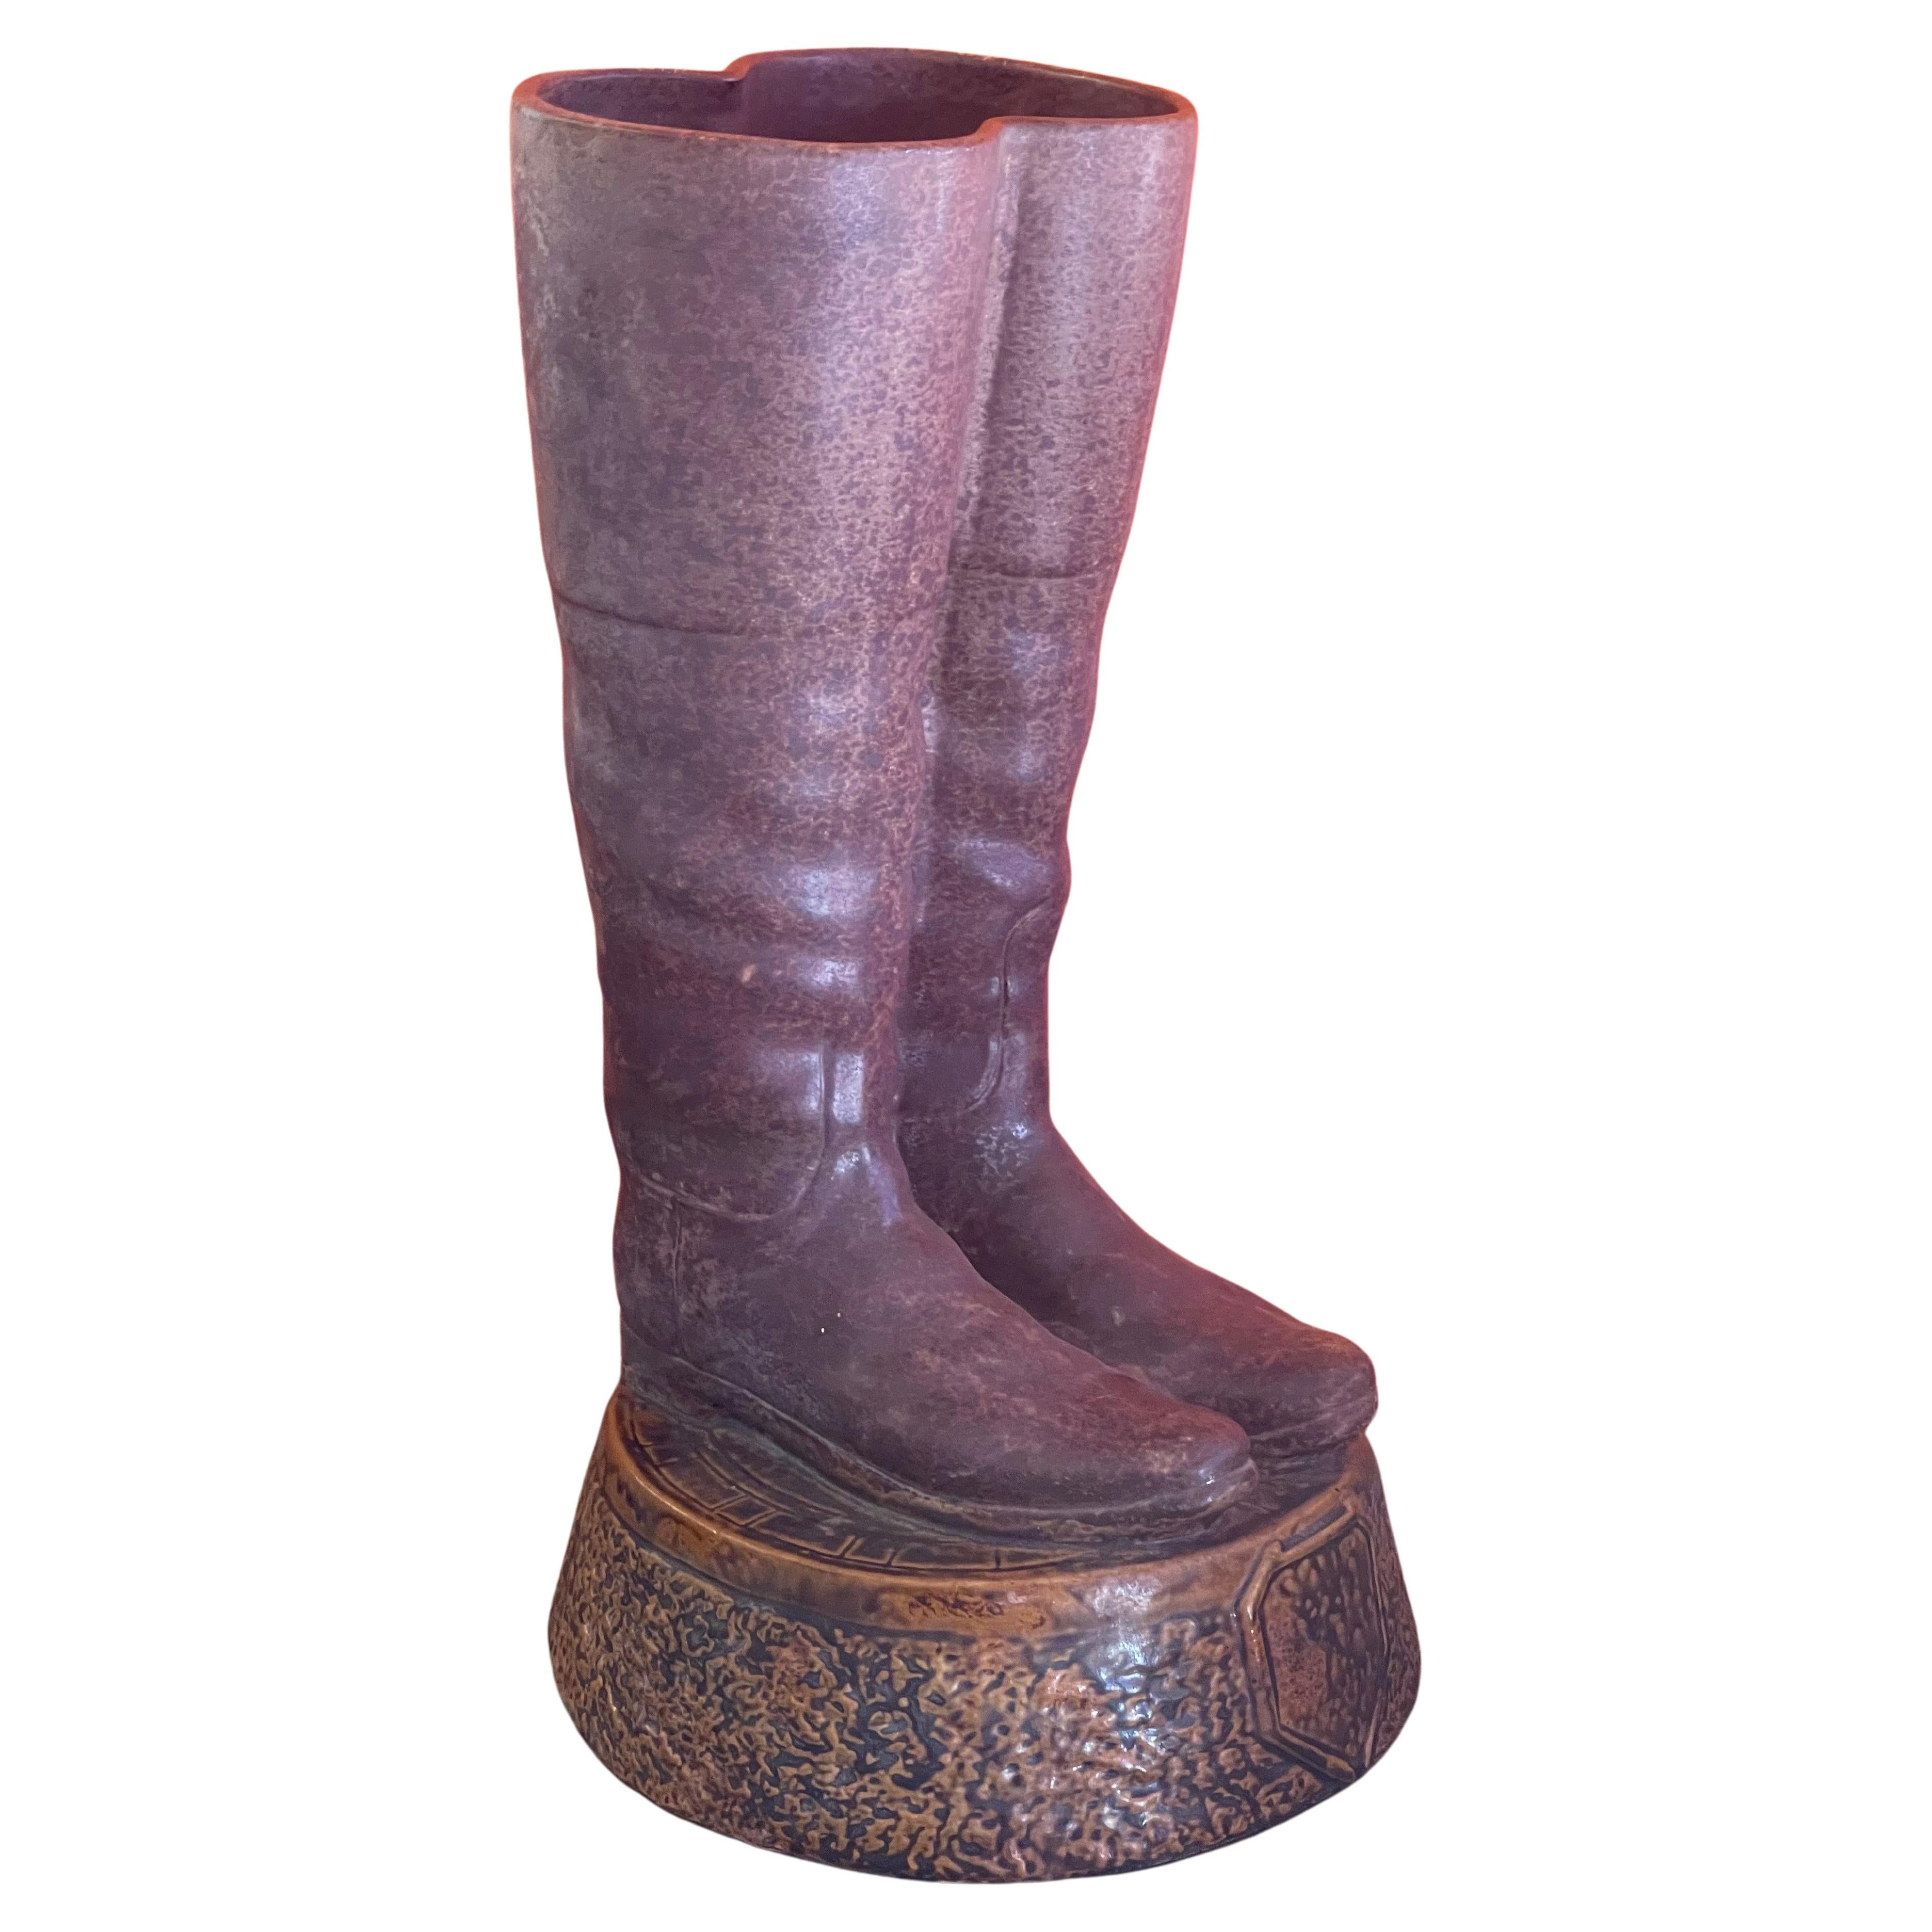 Contemporary Terracotta "Pair of Boots" Umbrella Stand For Sale